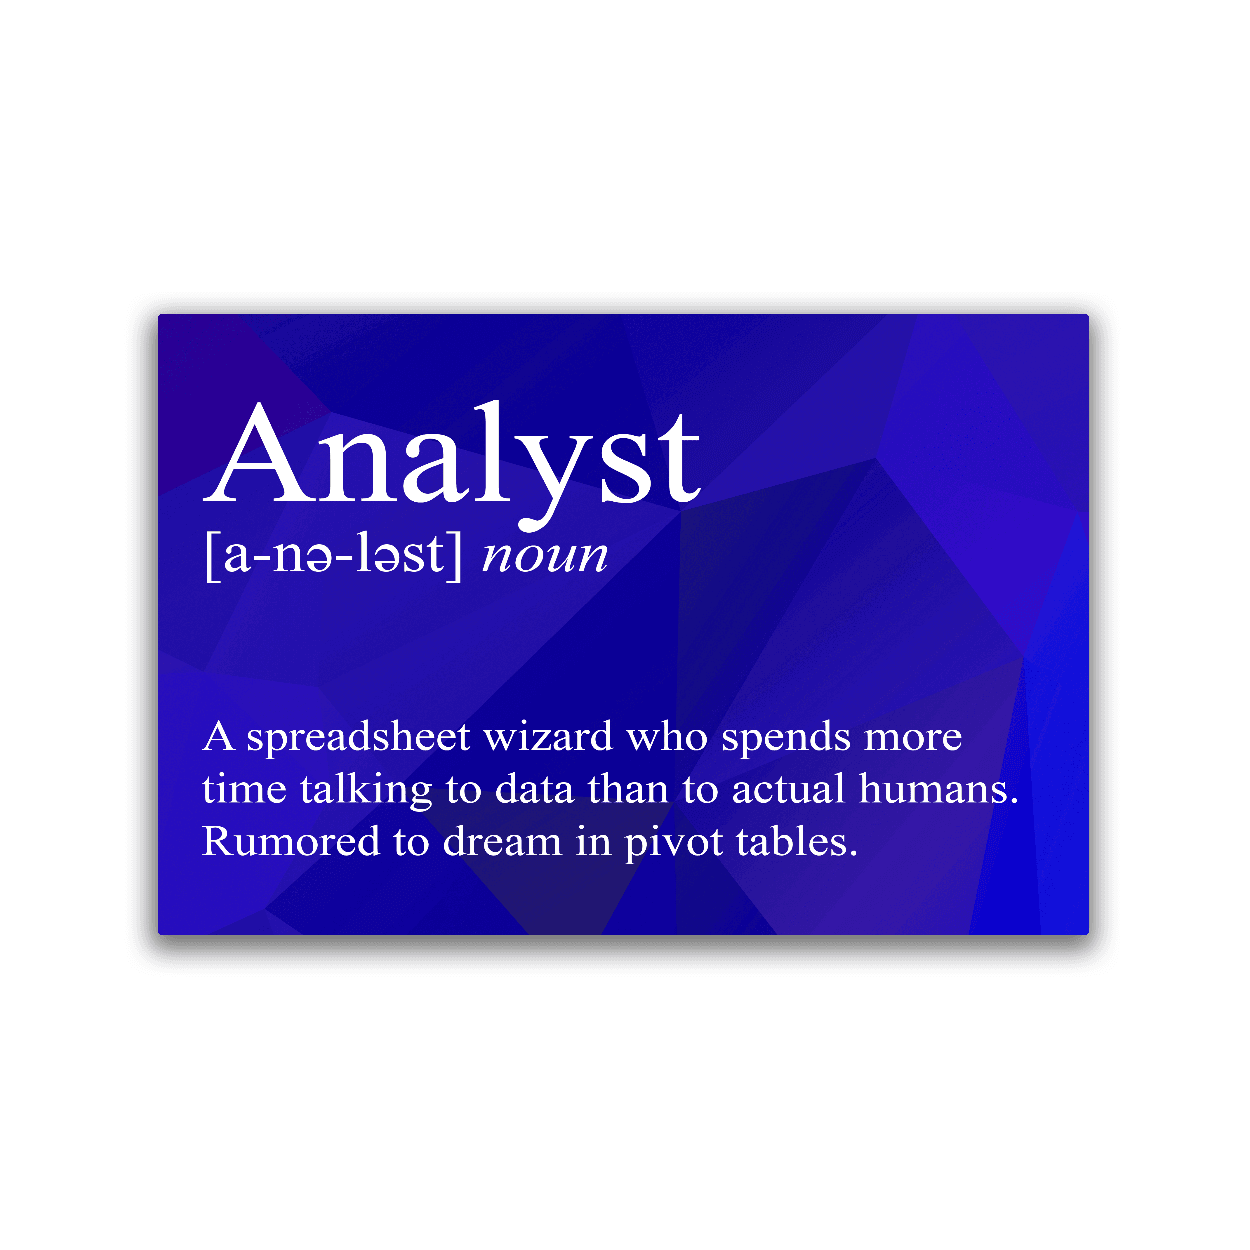 2x3 colorful magnet with image of triangles with text snarkily defining an analyst